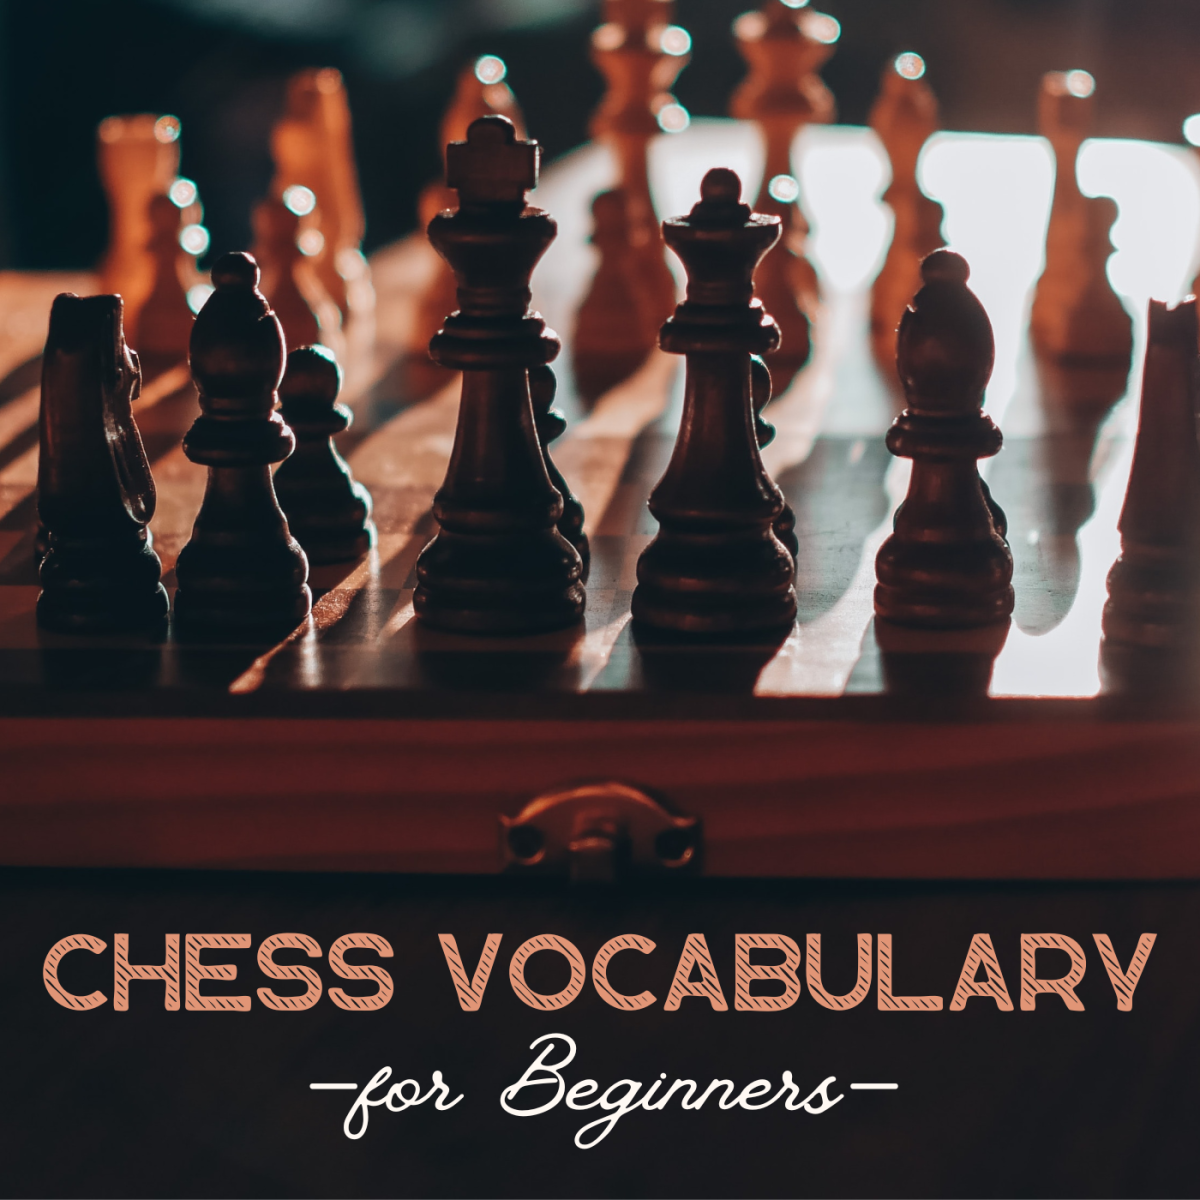 Learn some common terms used in the game of chess.